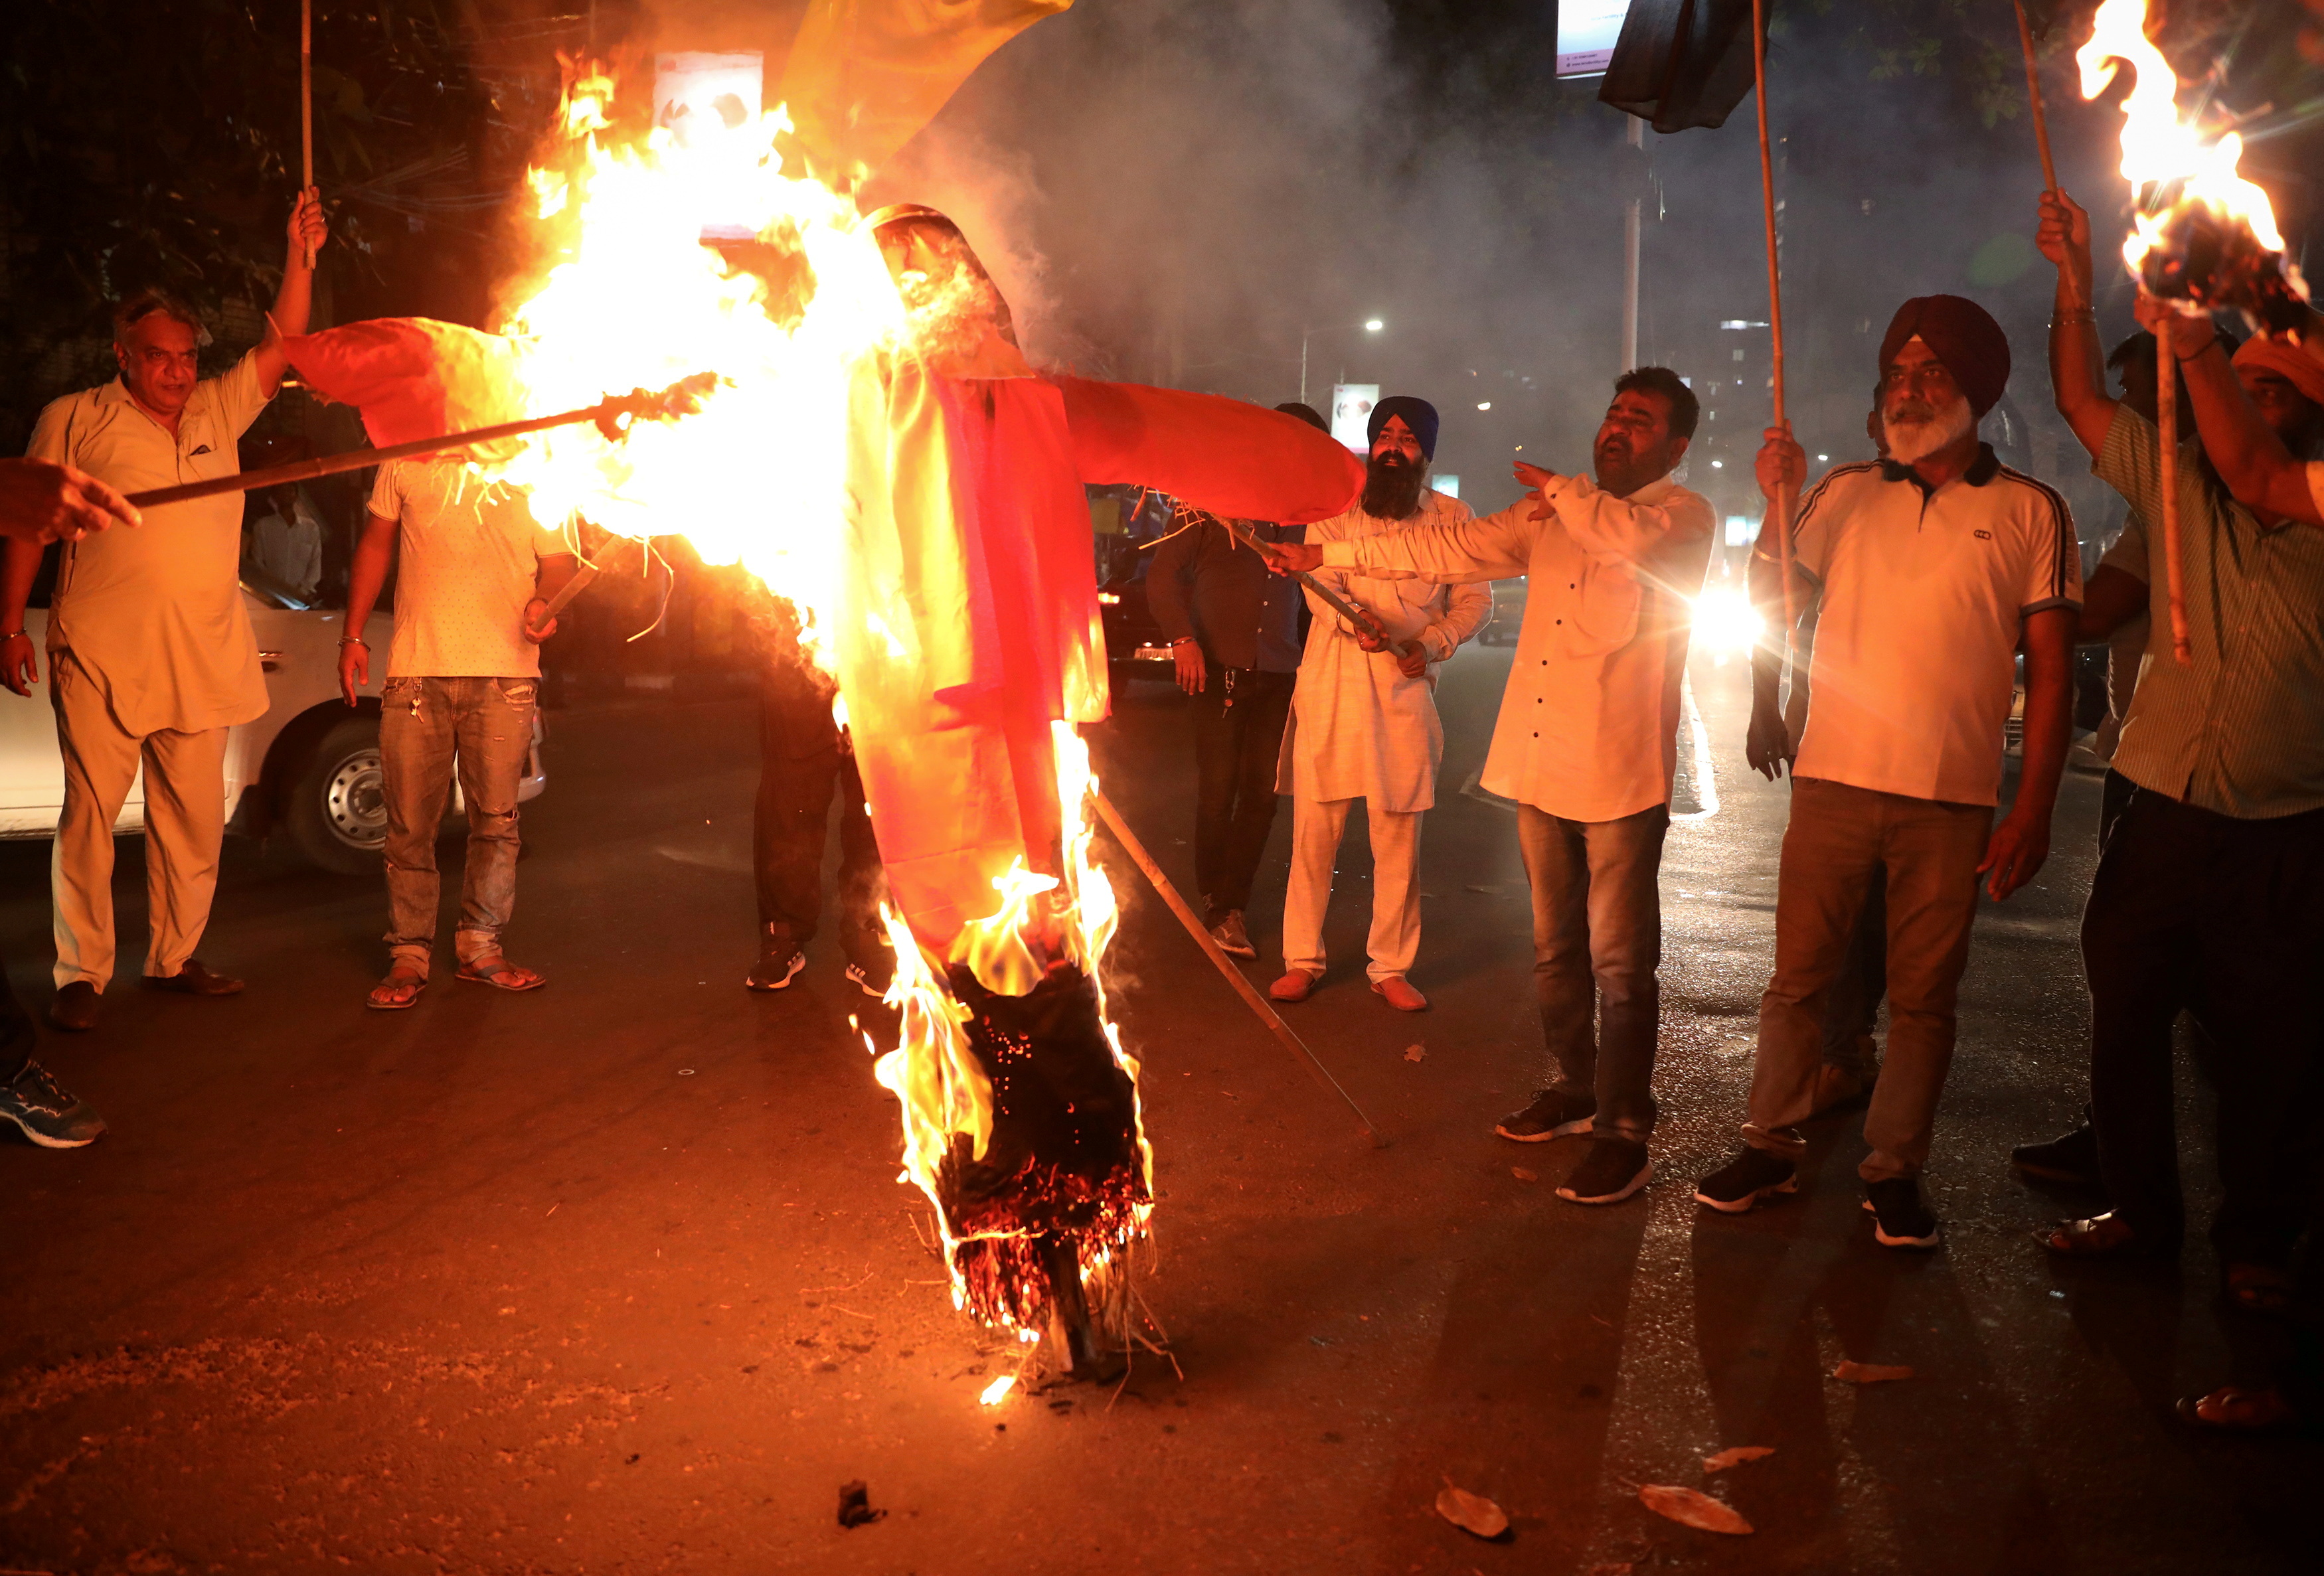 Protestors burn an effigy of Yogi Adityanath, Chief Minister of the northern state of Uttar Pradesh, during a protest after people were killed when a car linked to a federal minister ran over farmers protesting against controversial farm laws in Uttar Pradesh on Sunday, in Kolkata, India, October 4, 2021. REUTERS/Rupak De Chowdhuri